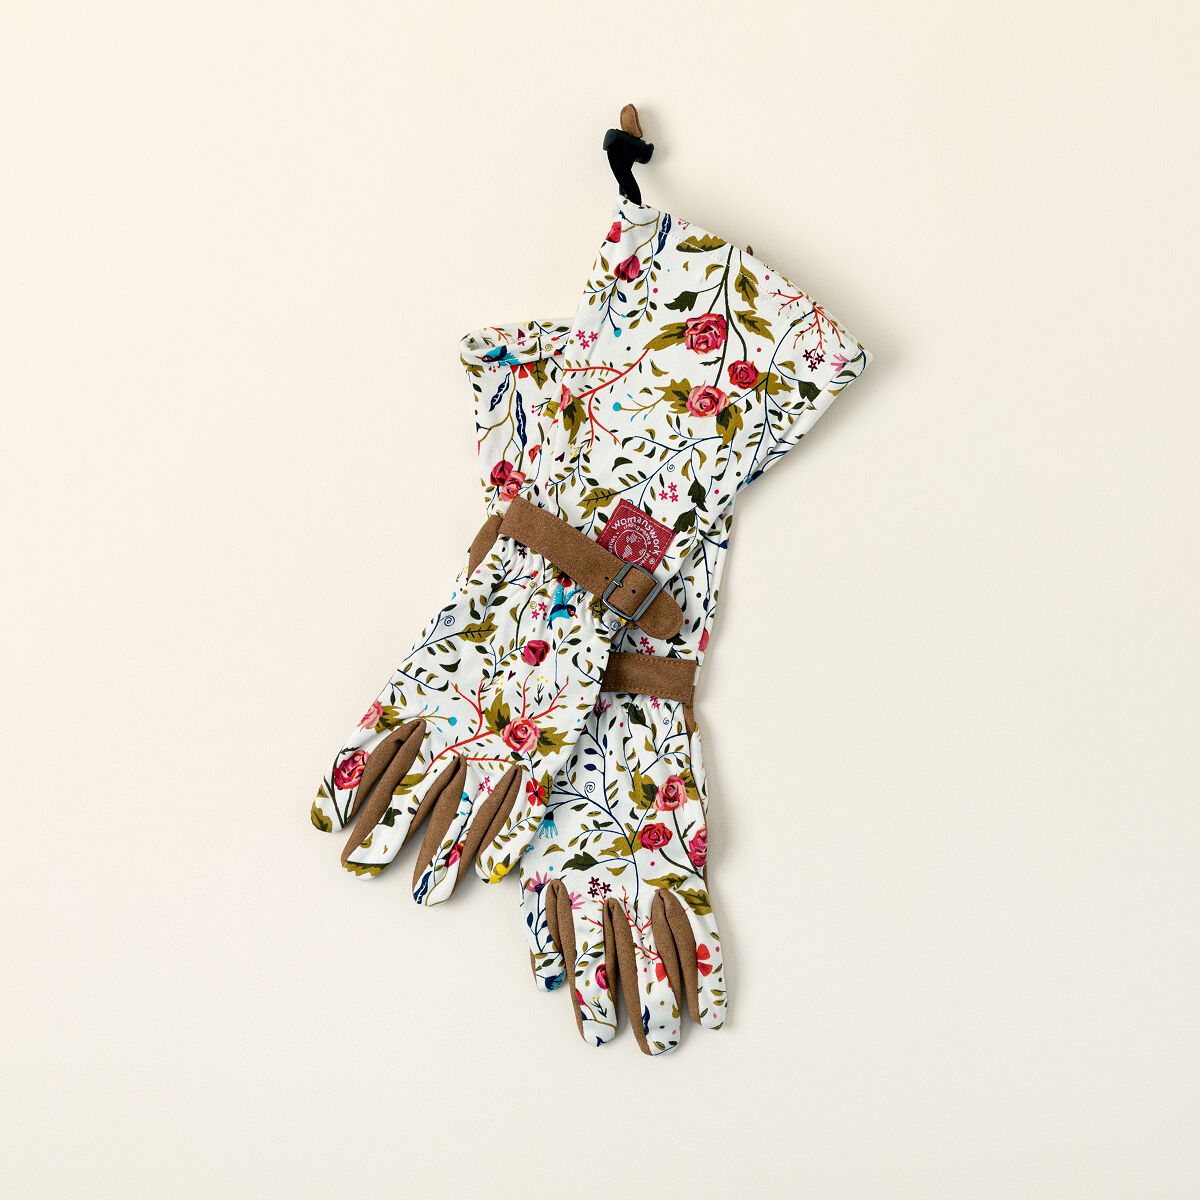 Arm-Protecting Garden Gloves | UncommonGoods